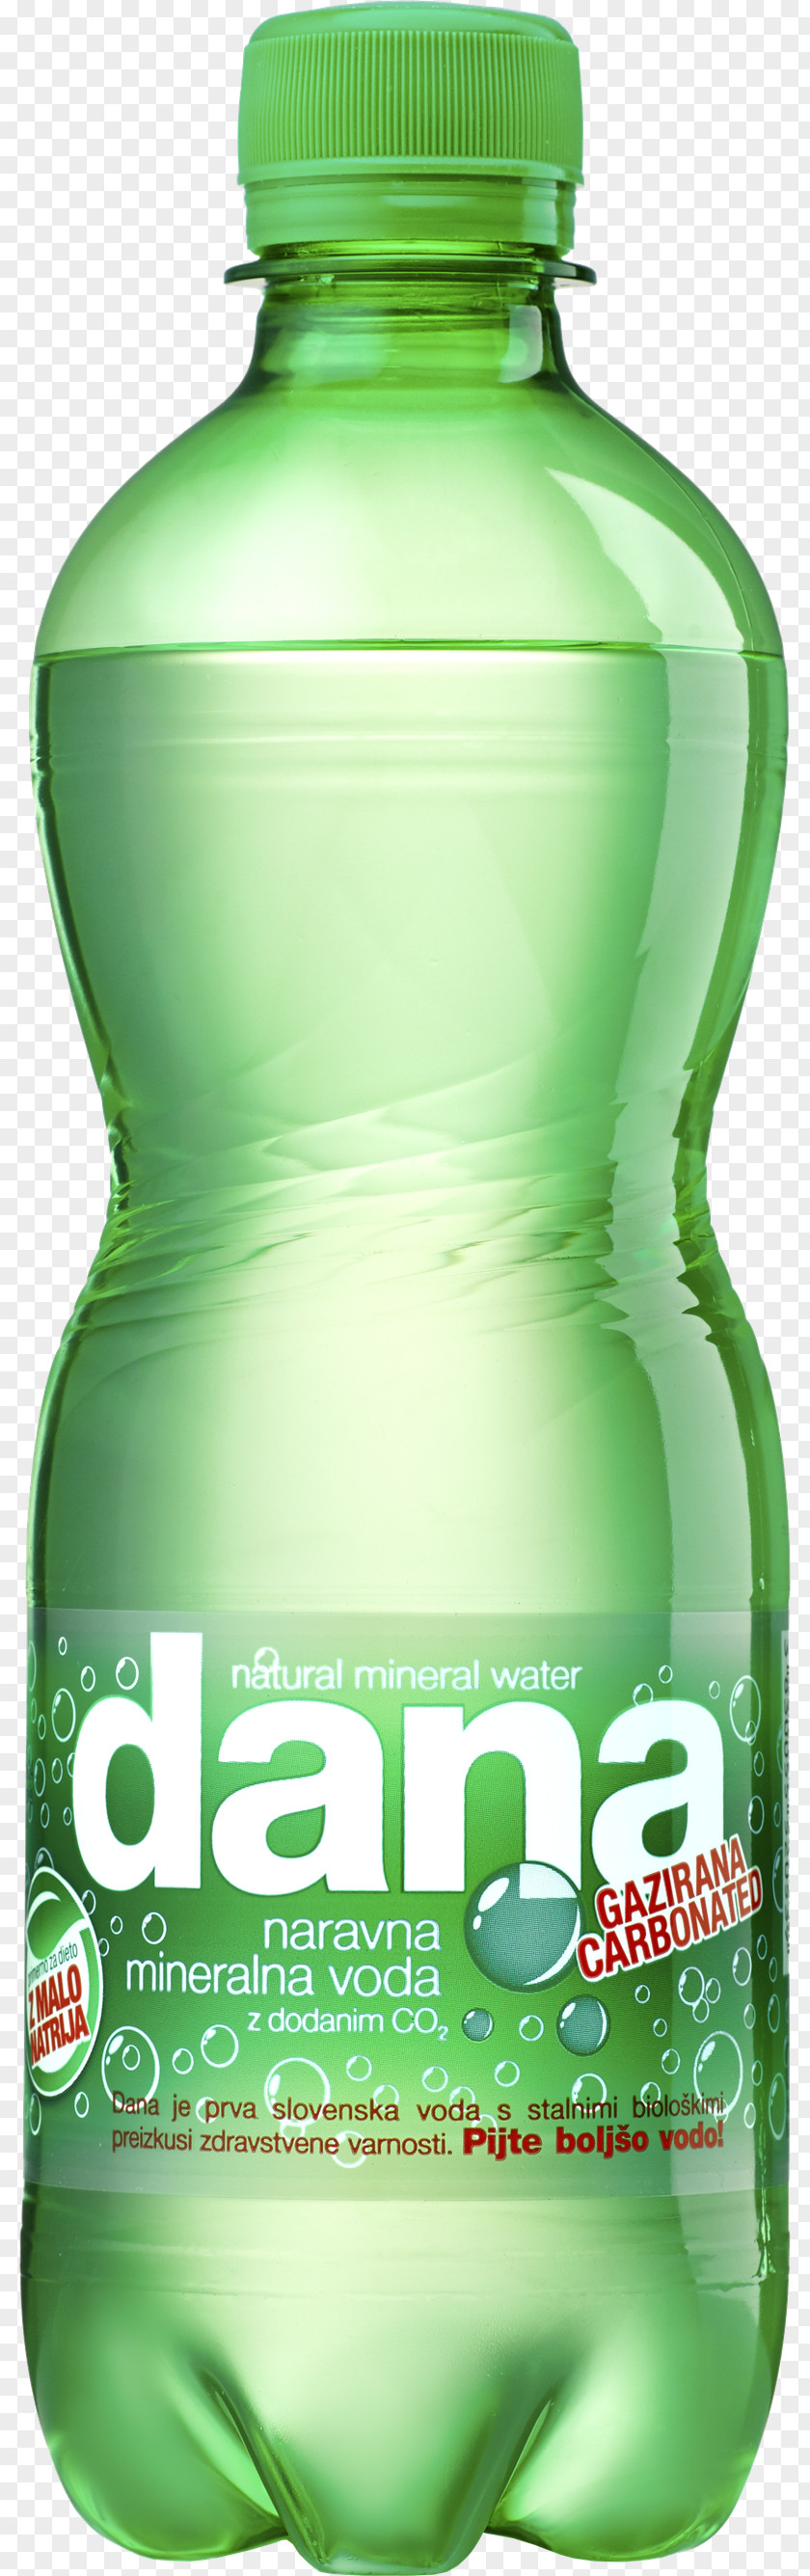 Natural Minerals Mineral Water Plastic Bottle Fizzy Drinks PNG